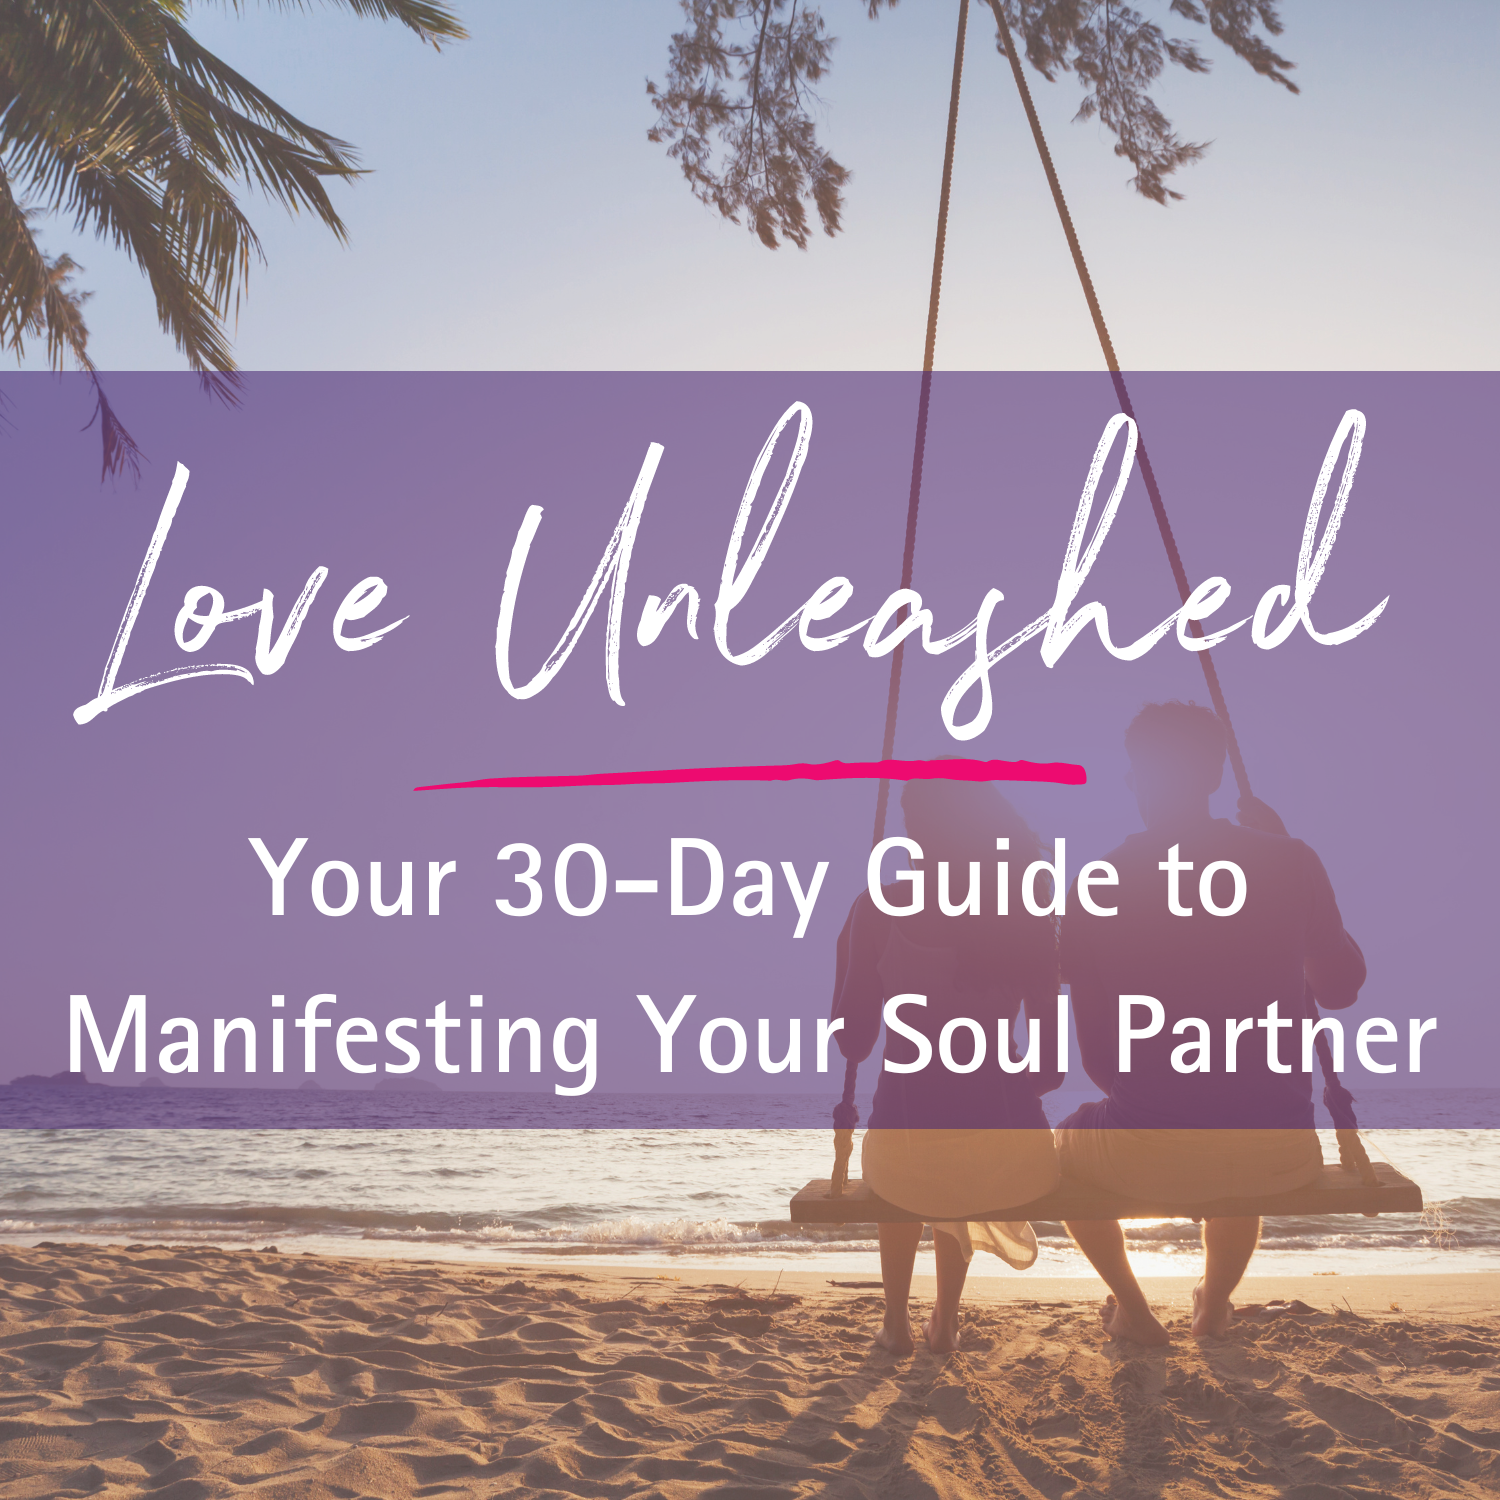 Love Unleashed: Your 30-Day Guide to Manifesting Your Soul Partner